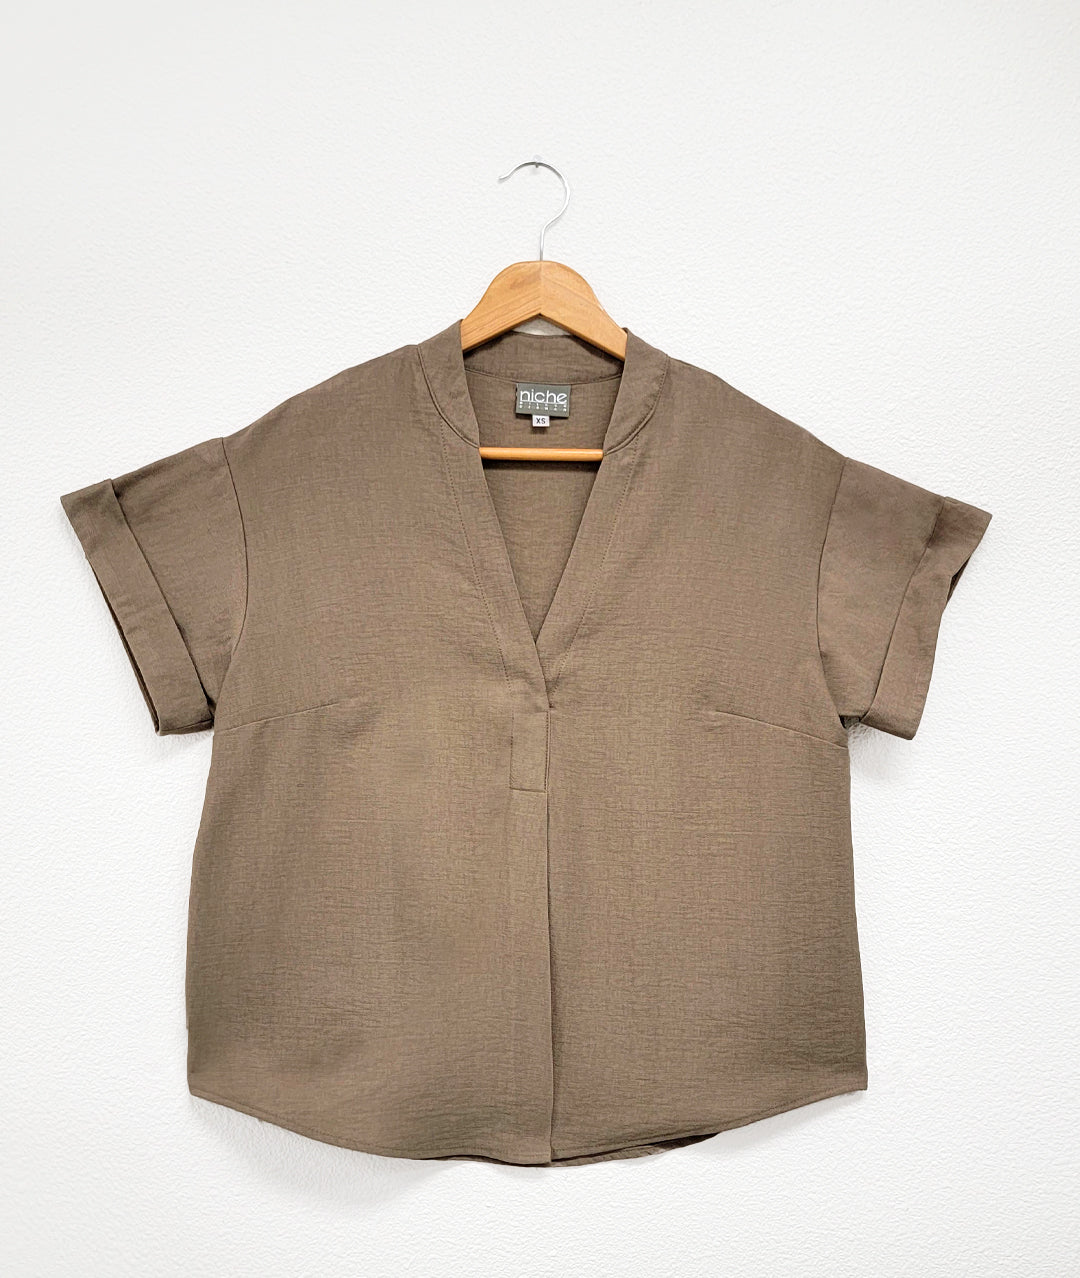 pebble brown pullover top with cuffed short sleeves, a round hemline, and a vneck with a short standing collar and folded center front